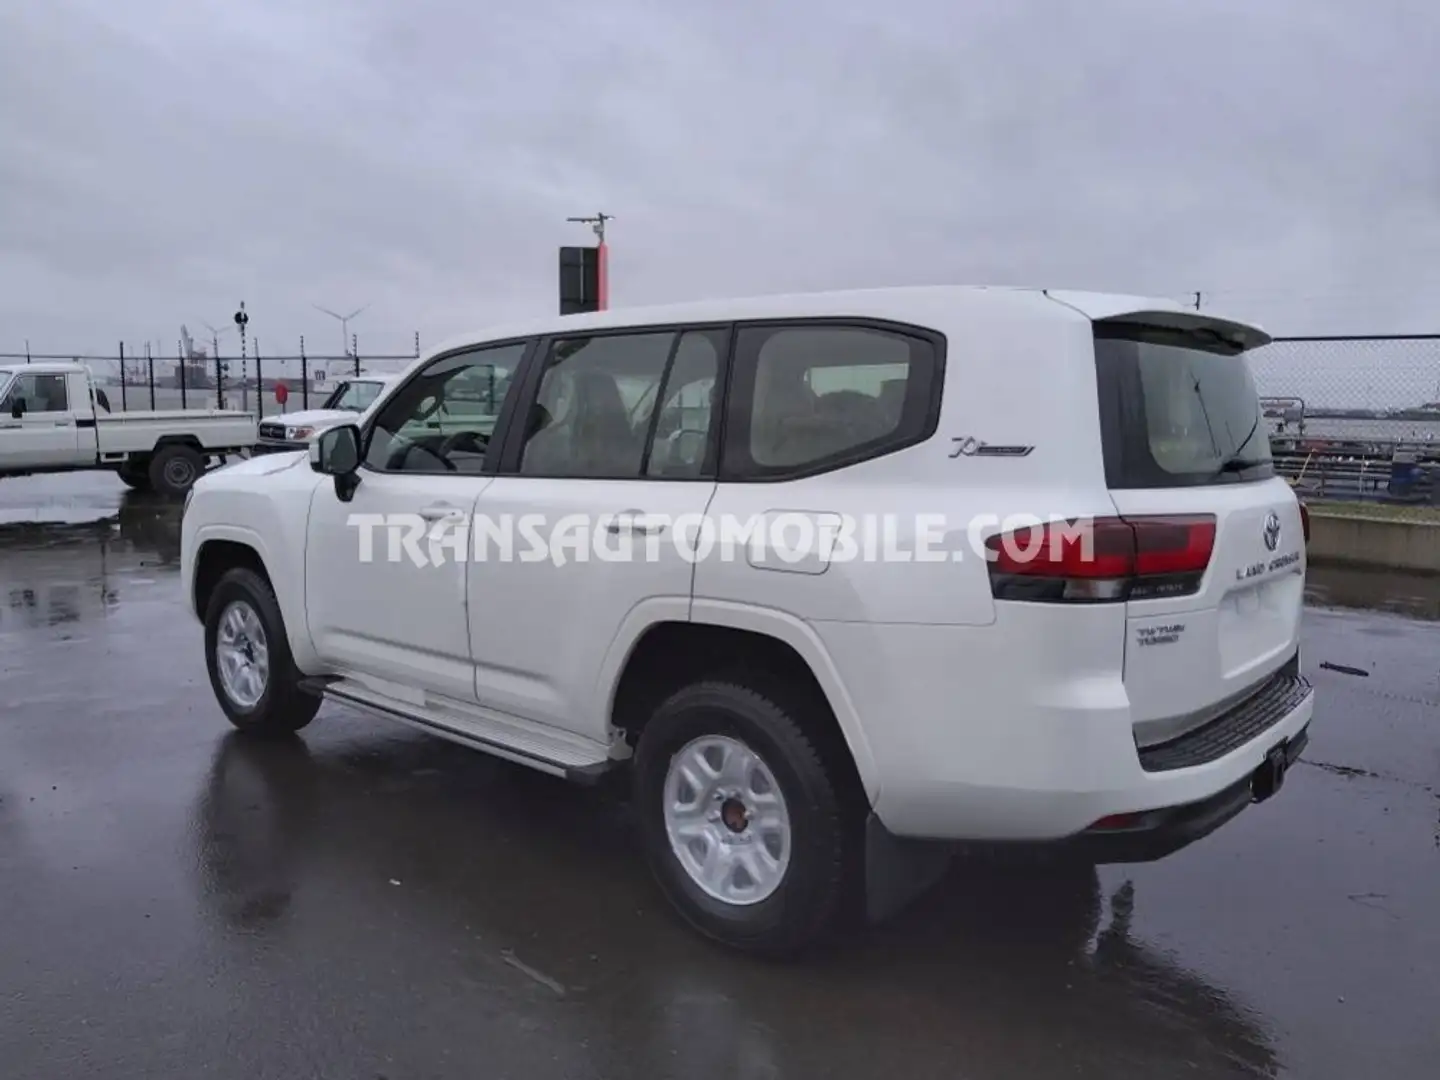 Toyota Land Cruiser GXR-8 7 SEATERS / PLACES  - EXPORT OUT EU TROPICAL - 2